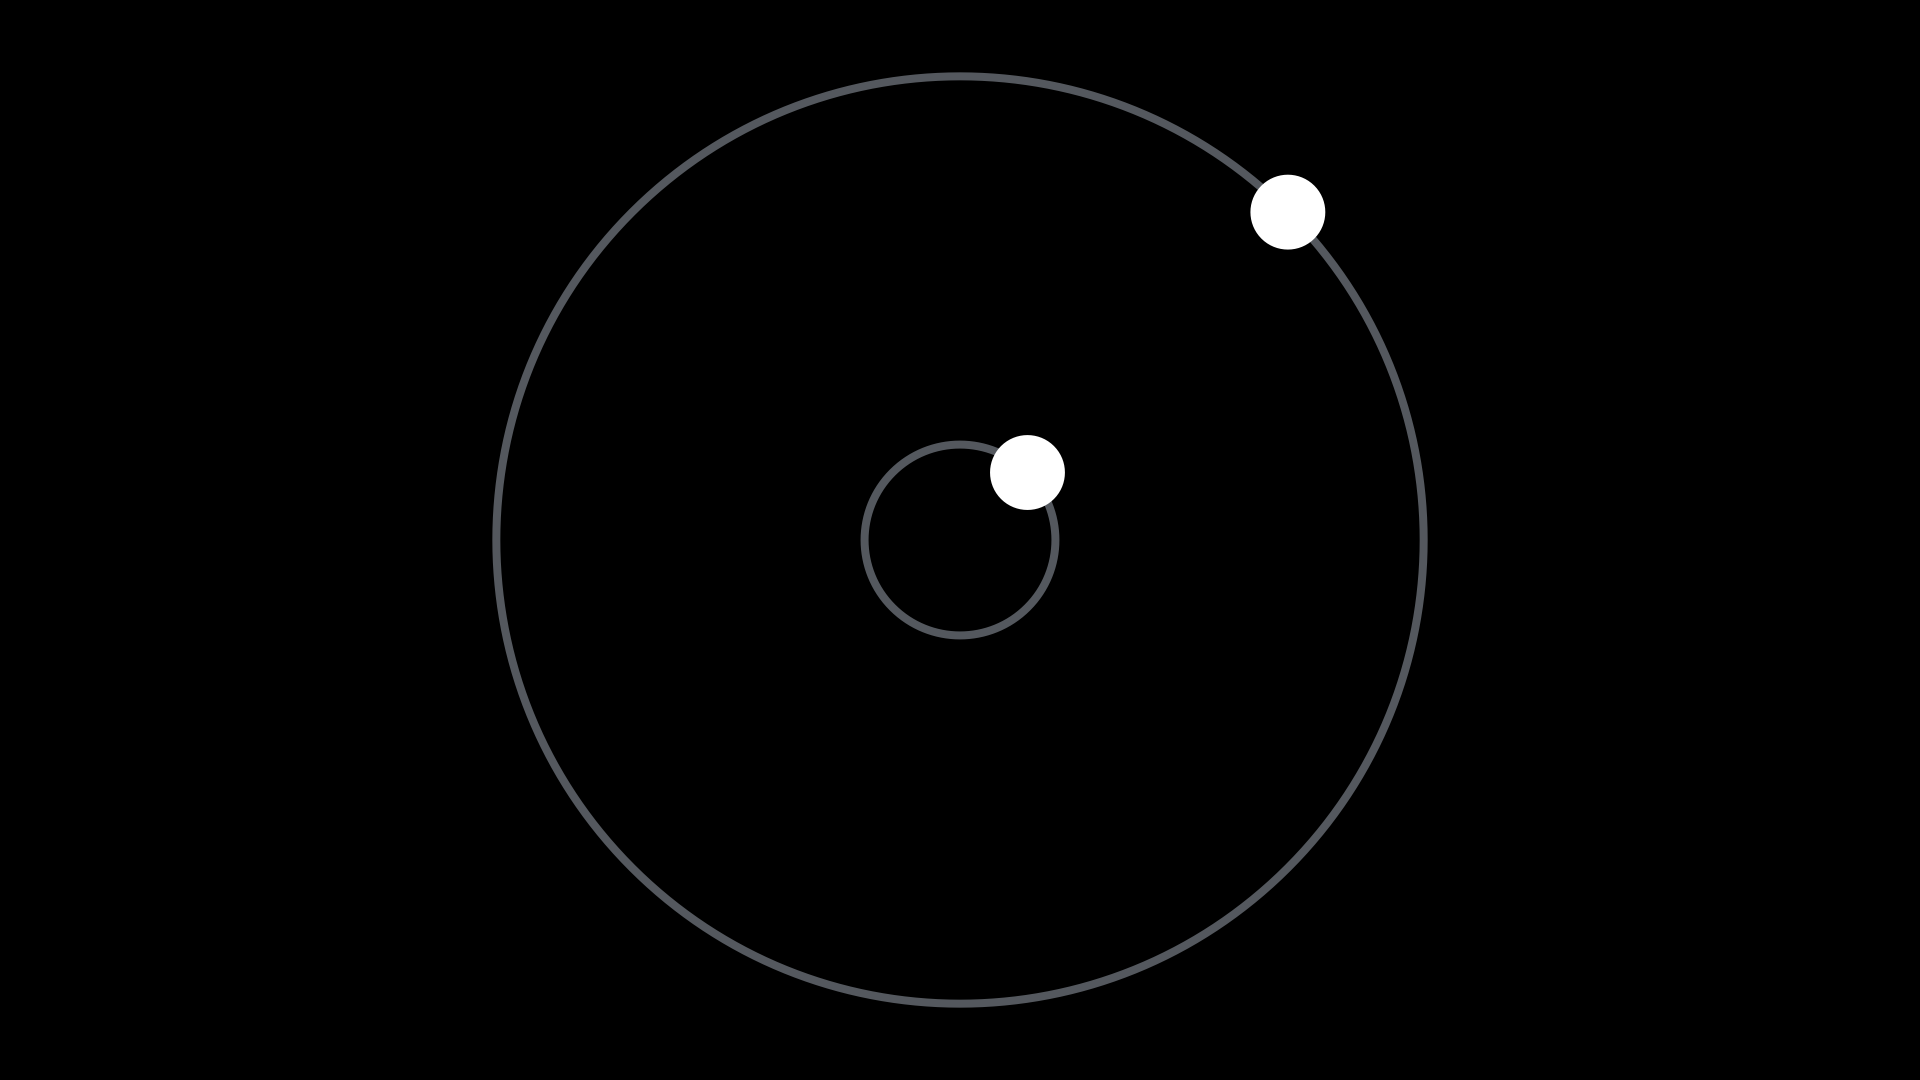 Two objects orbiting the same point. The inner object is closer to the center, so it has less distance to travel than the second outer object to complete its rotation.